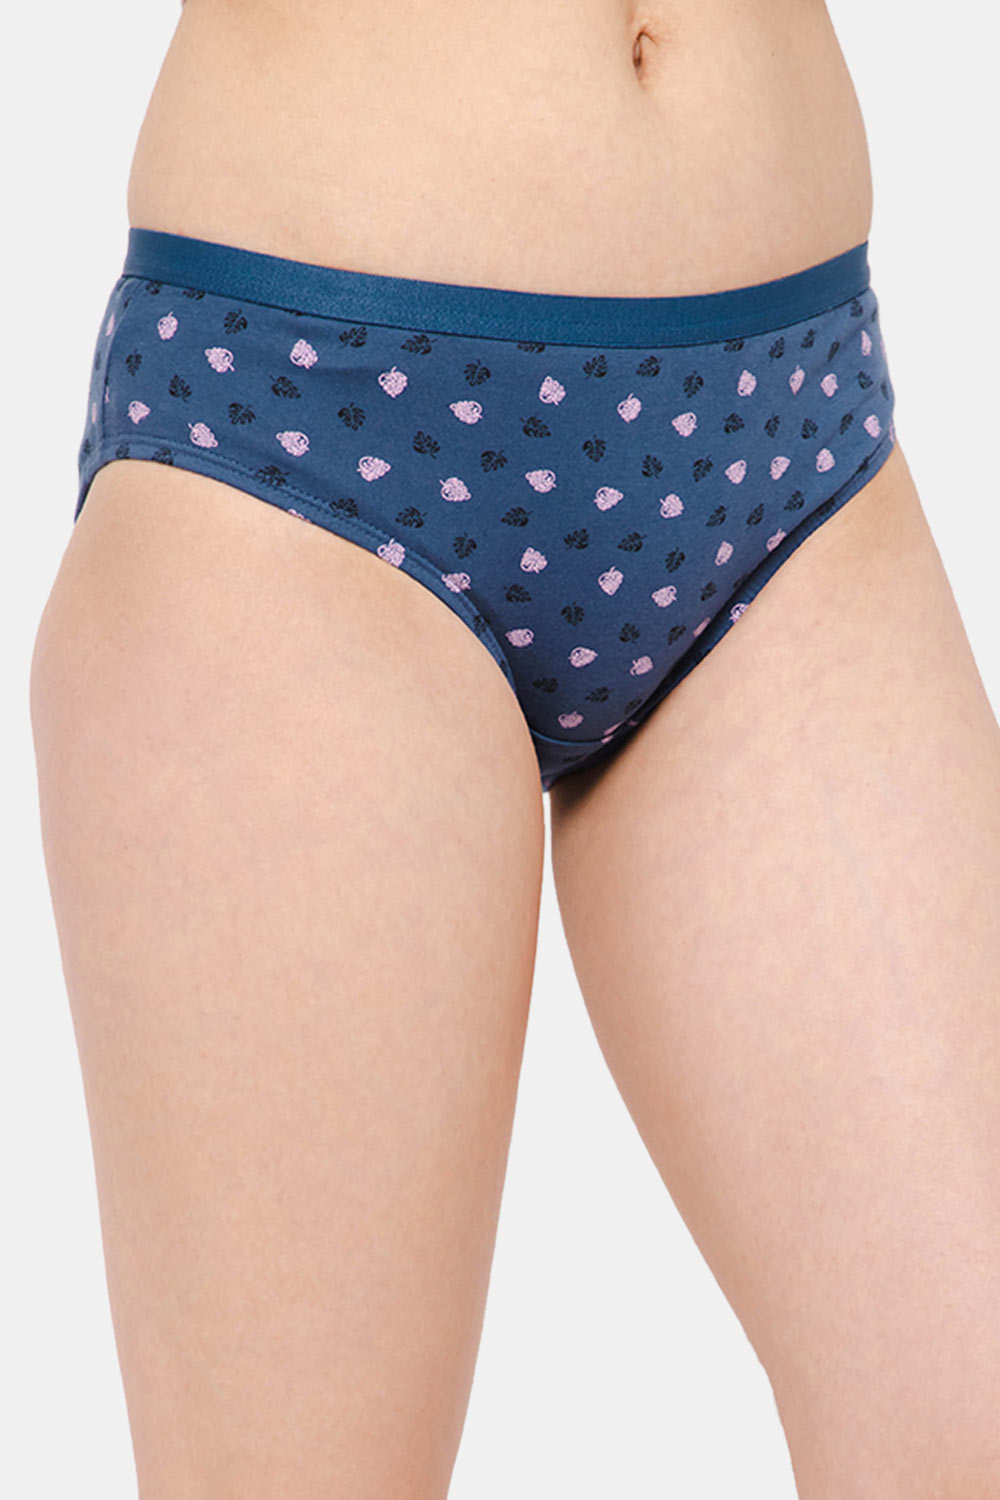 Intimacy Classic Dark Printed Panty - Outer Elastic - Pack of 3